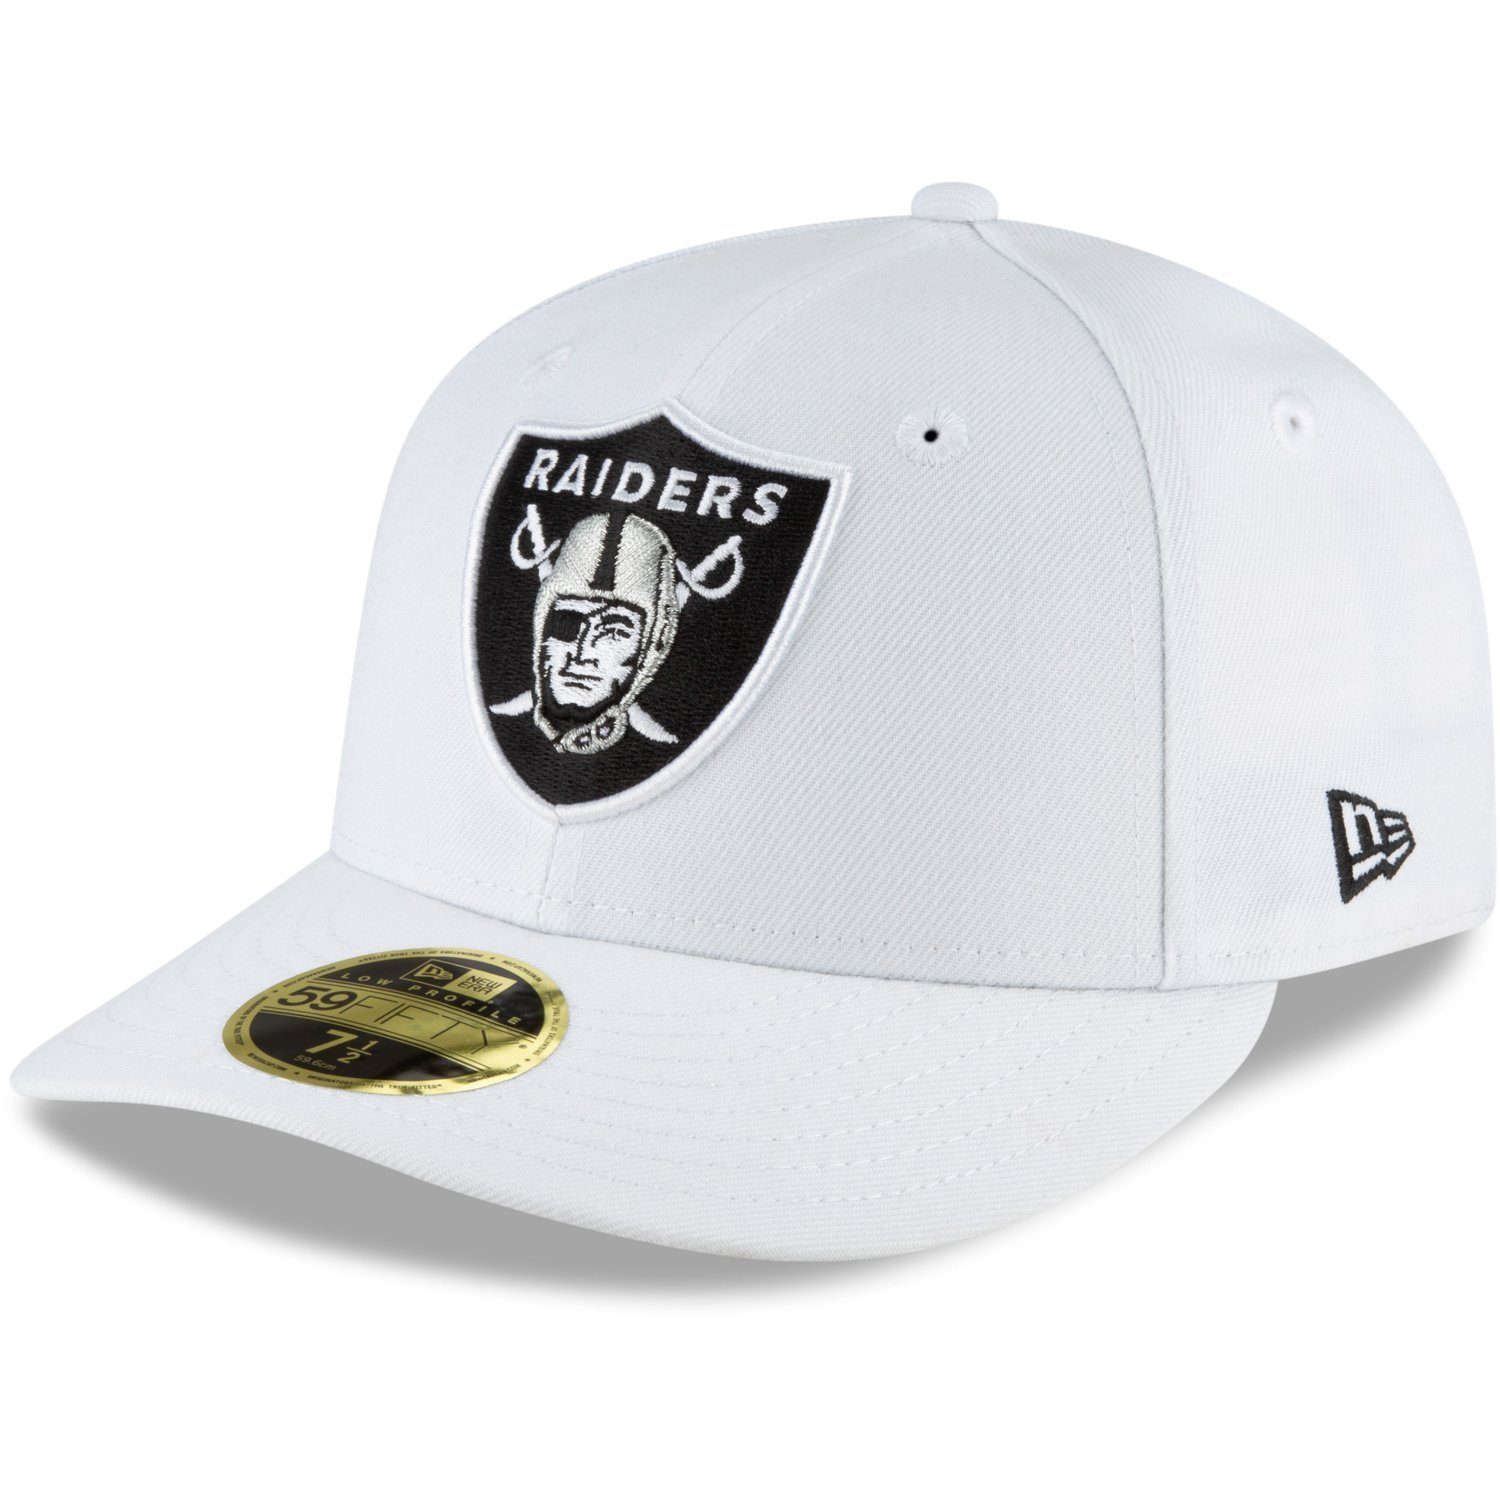 59Fifty Fitted Profile Era Las Raiders Vegas Weiß Low New Cap